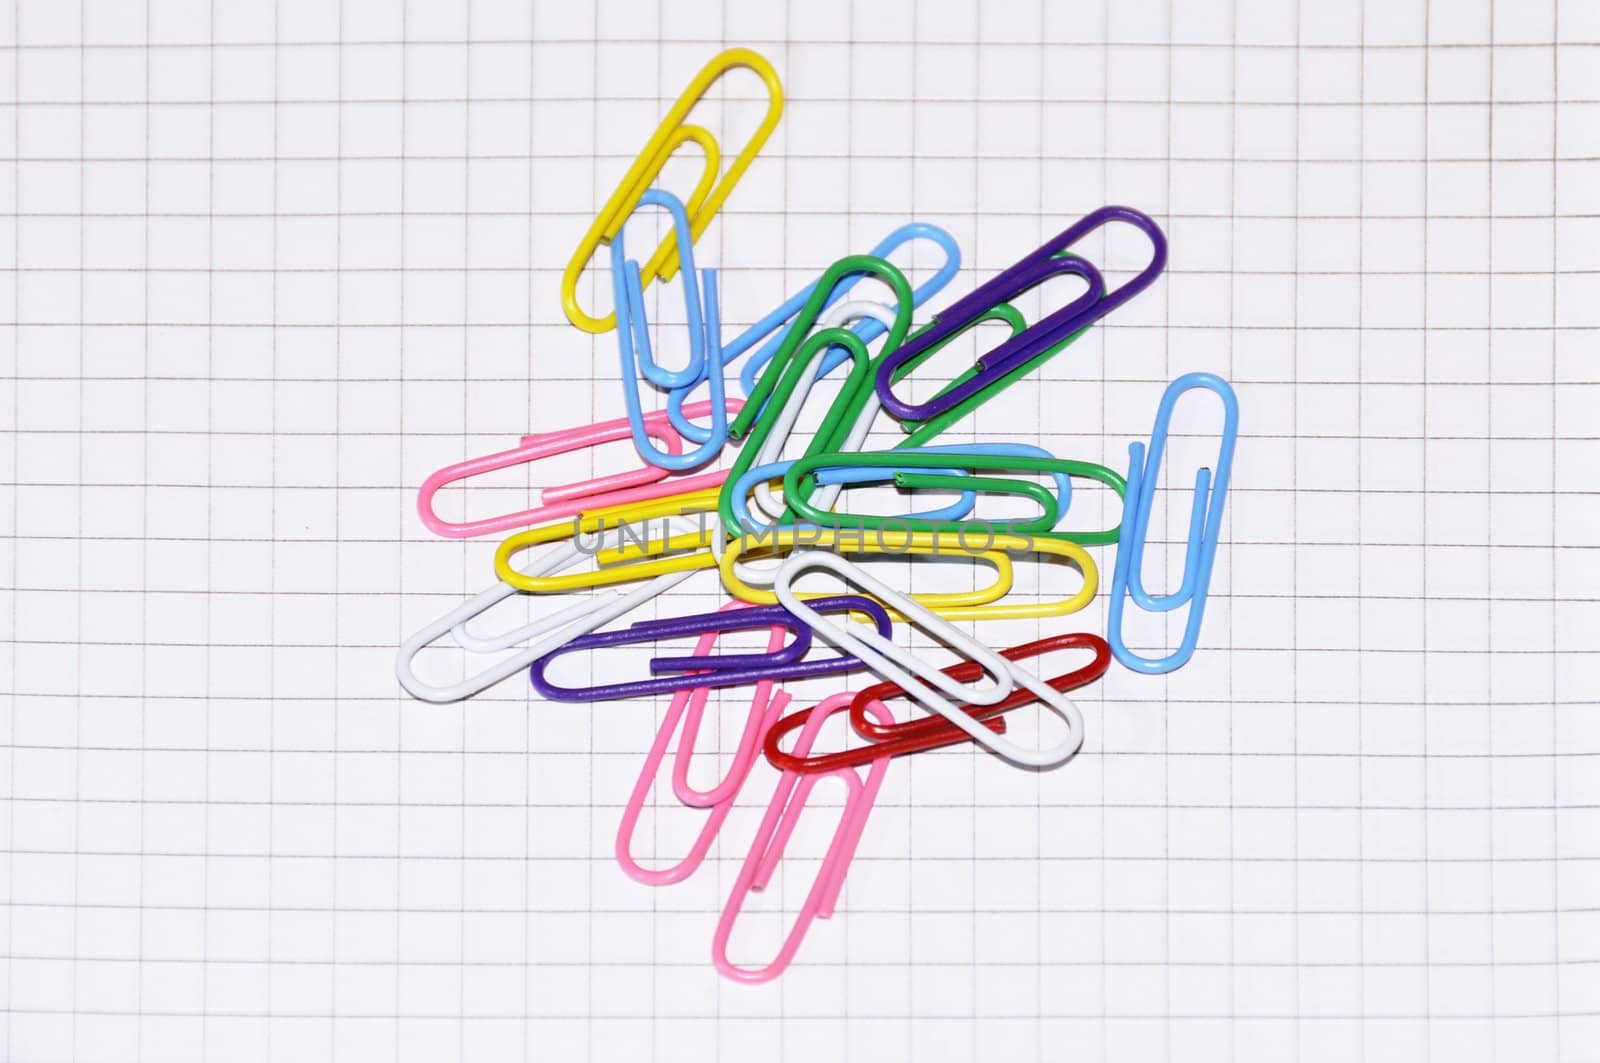 Multi coloured paper clips on a writing-book